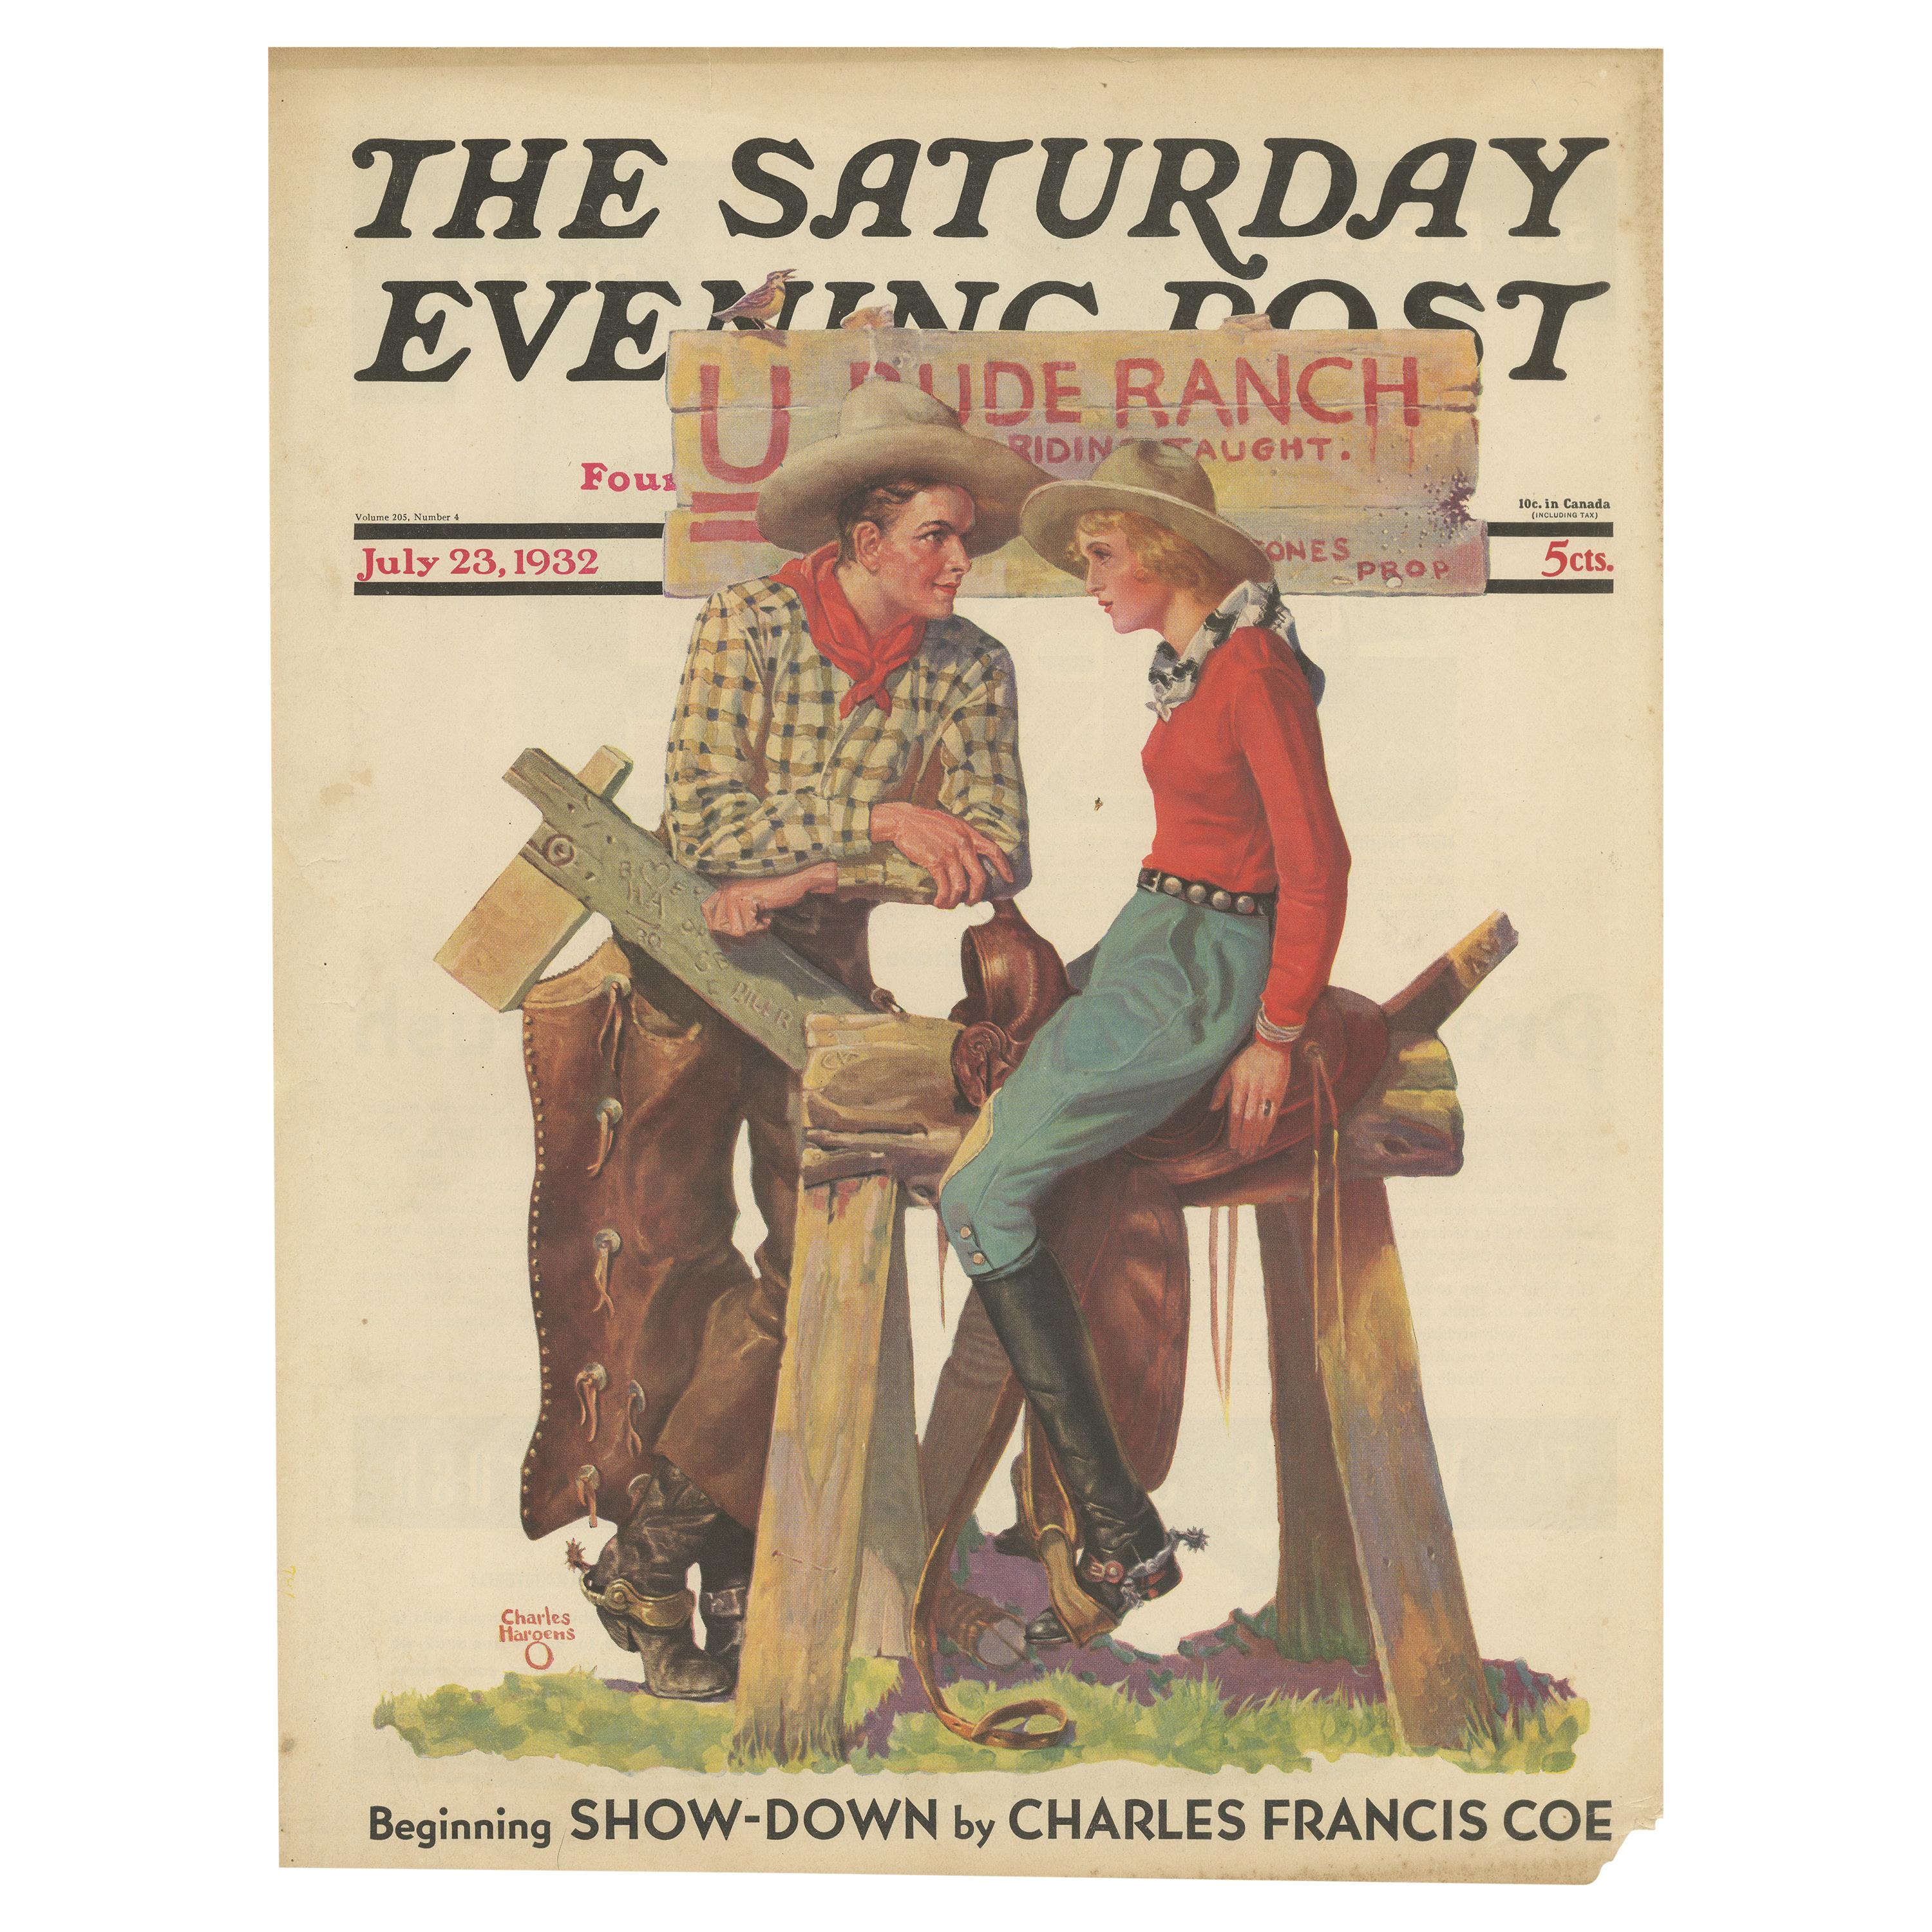 Vintage Print of Ranchers 'The Saturday Evening Post' '1932'